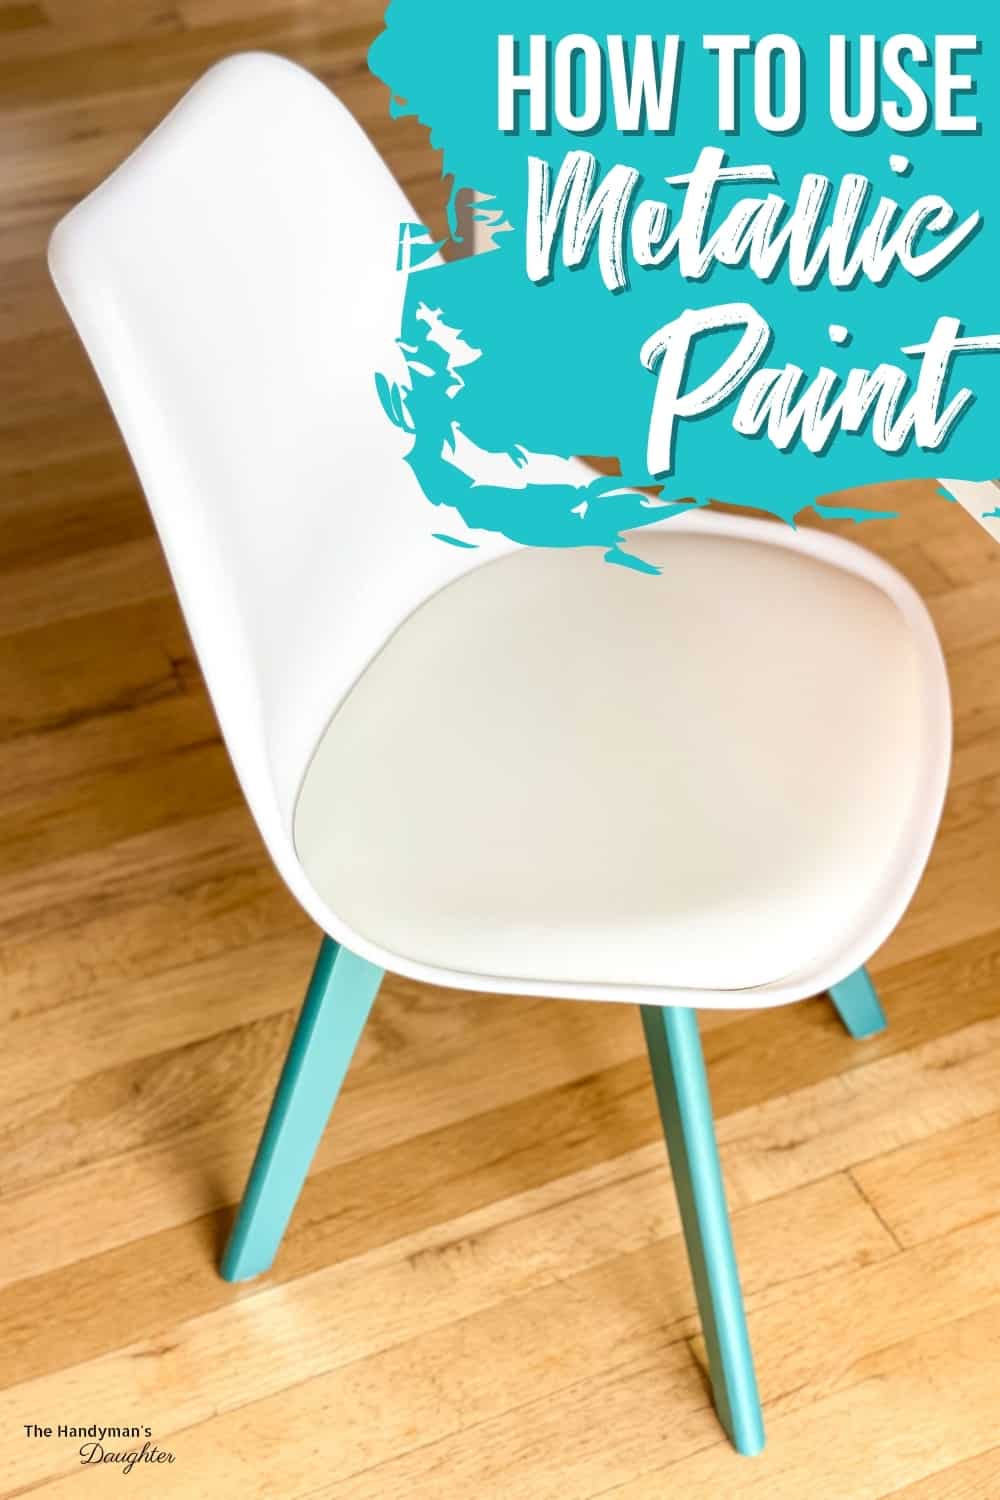 How to use metallic paint on wood